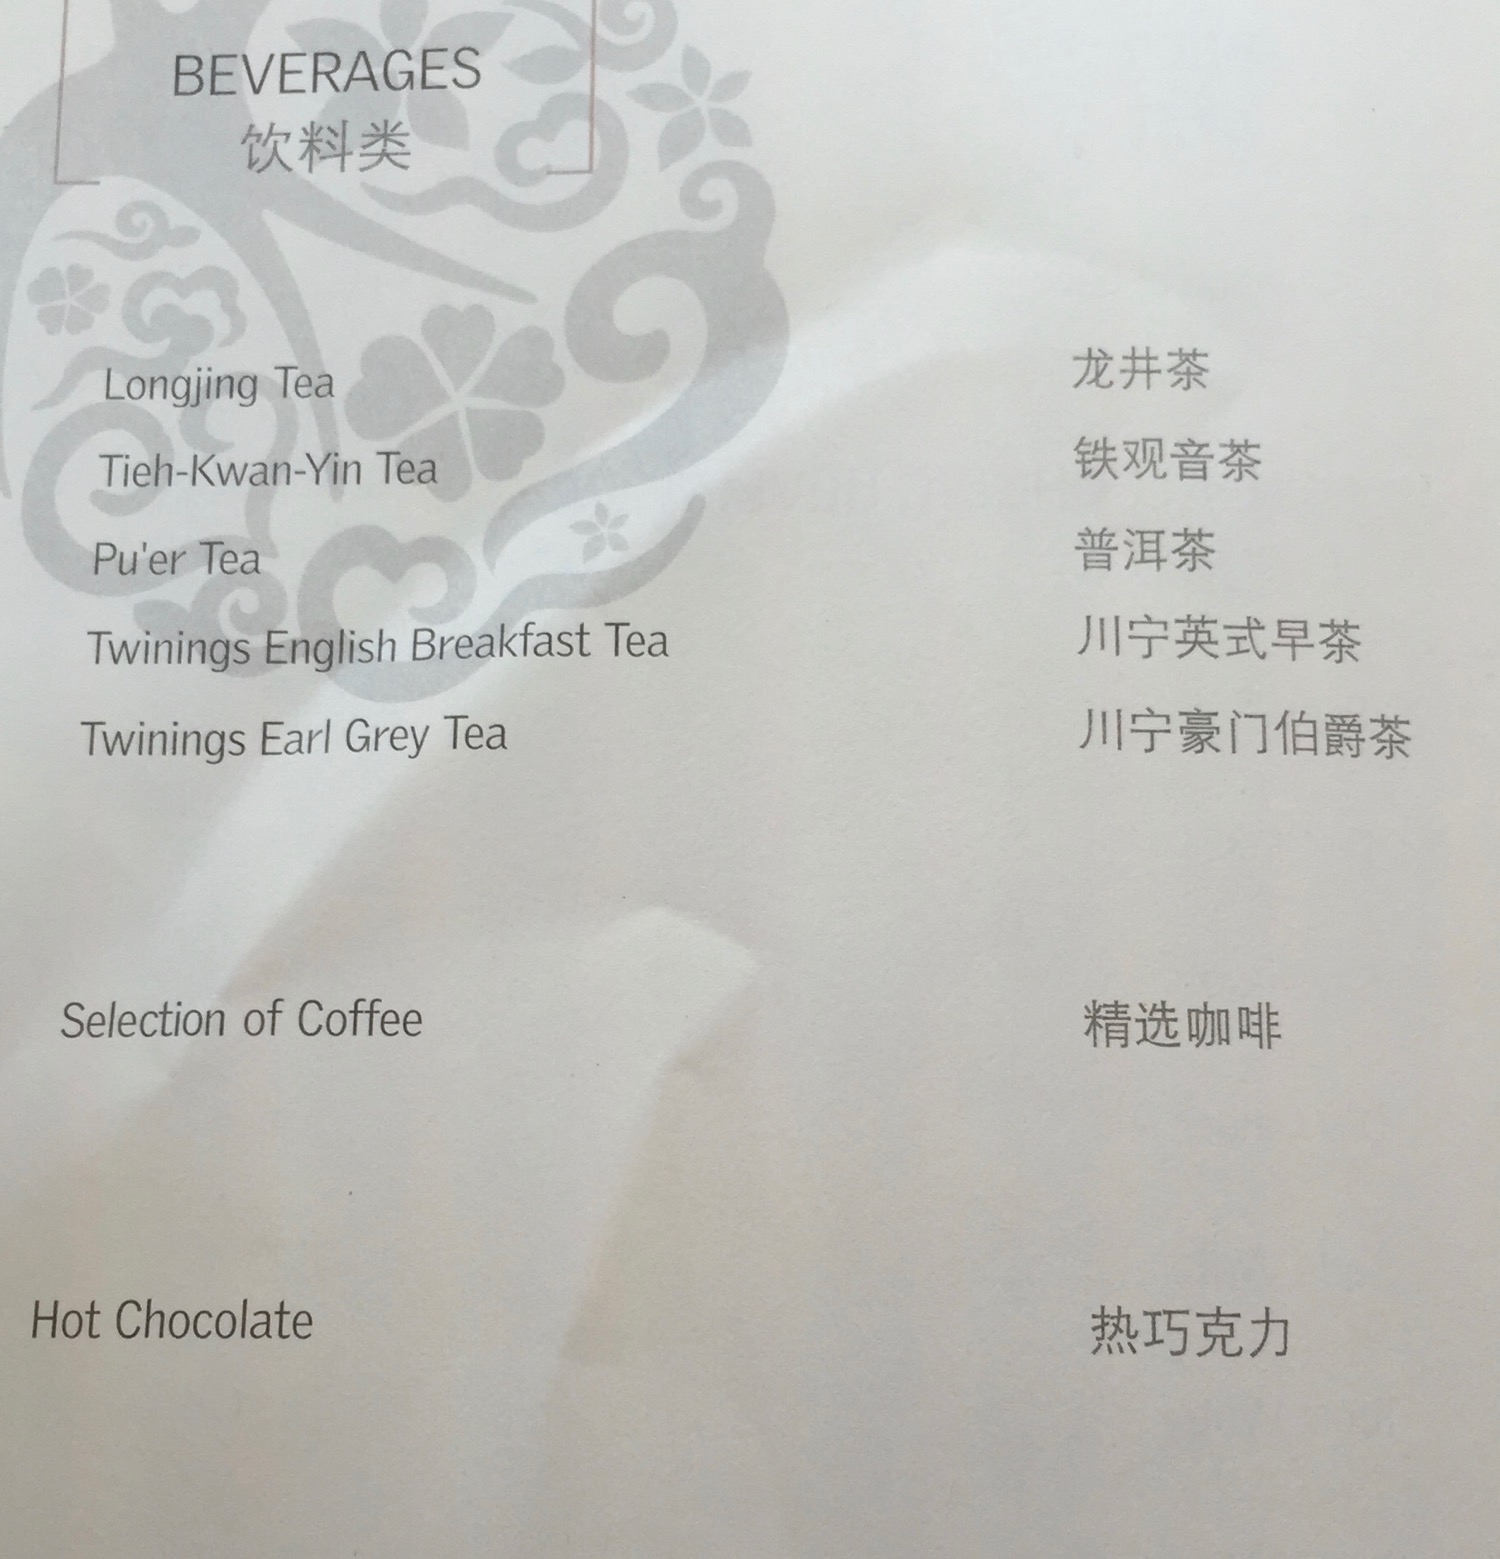 a menu of beverages on a white surface